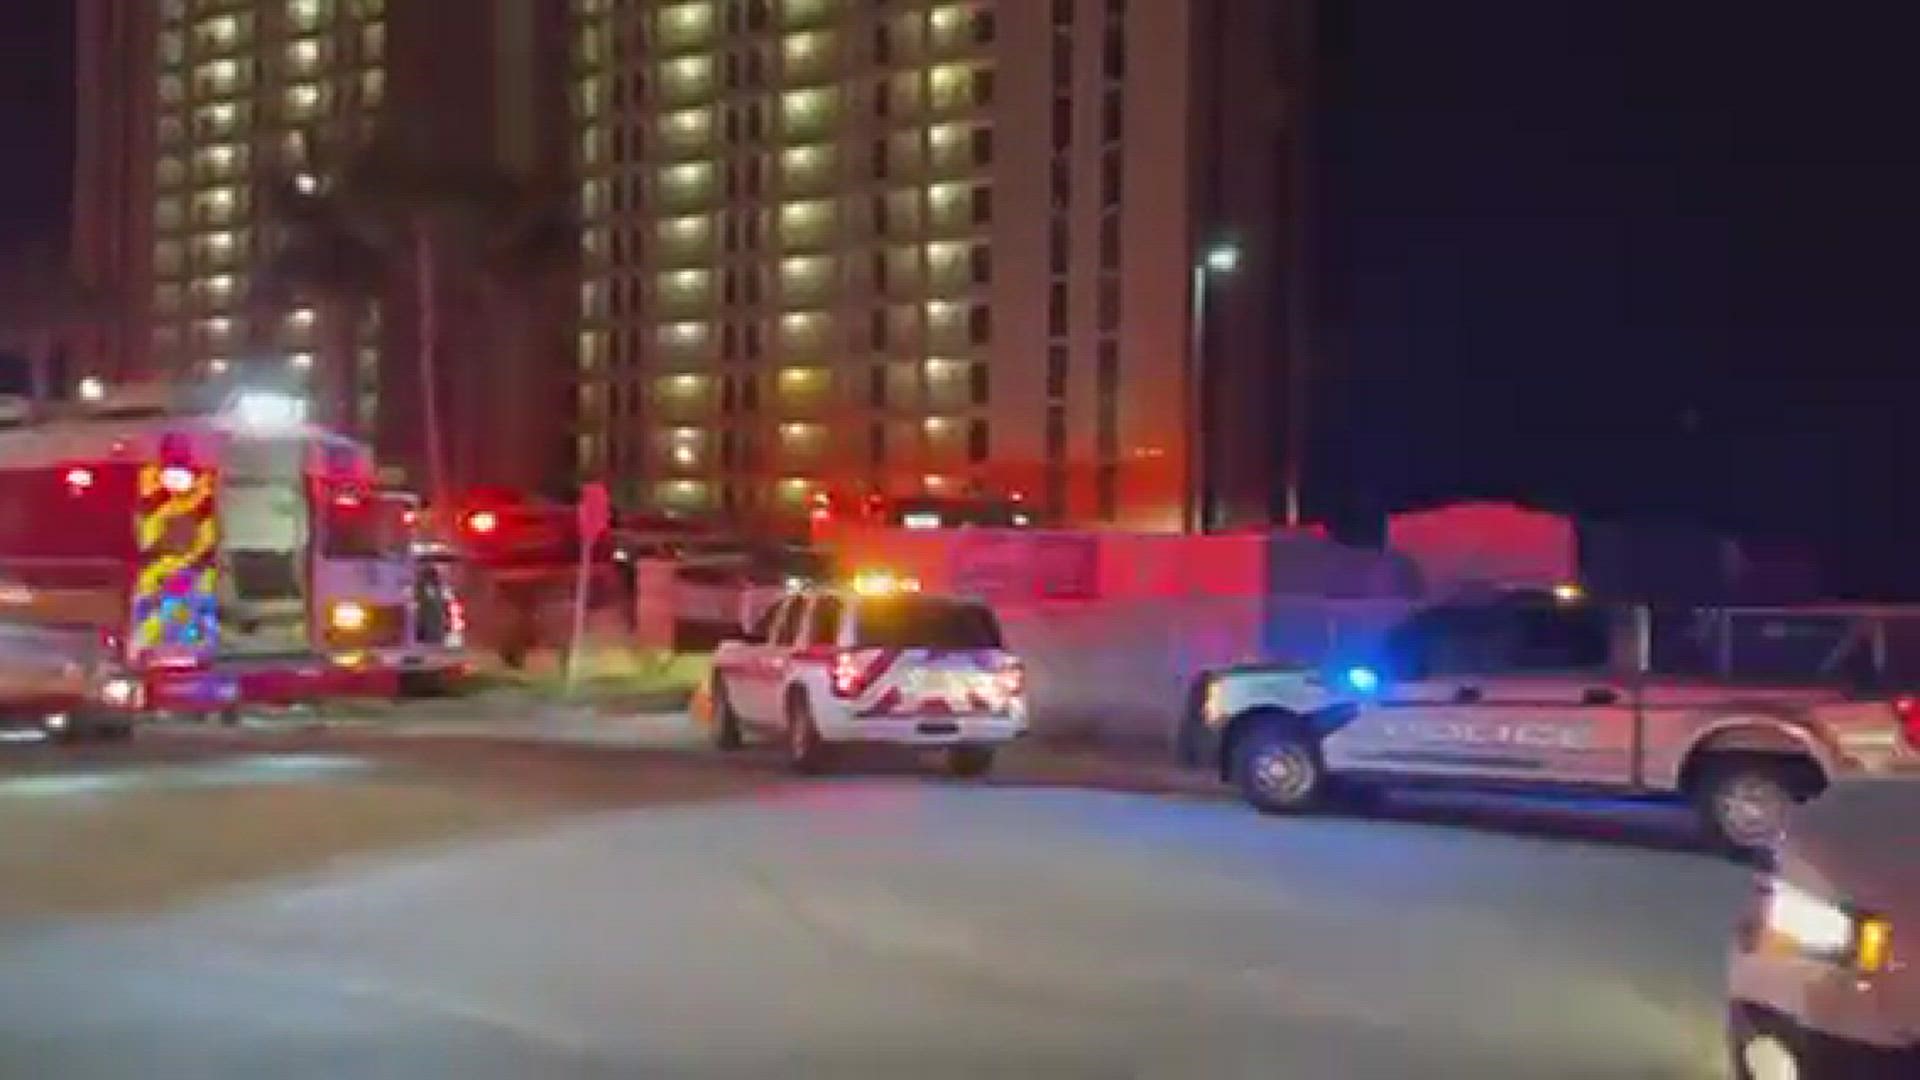 Jacksonville firefighters responded to small fire in Jax Beach high rise Thursday night.
Credit: Josh